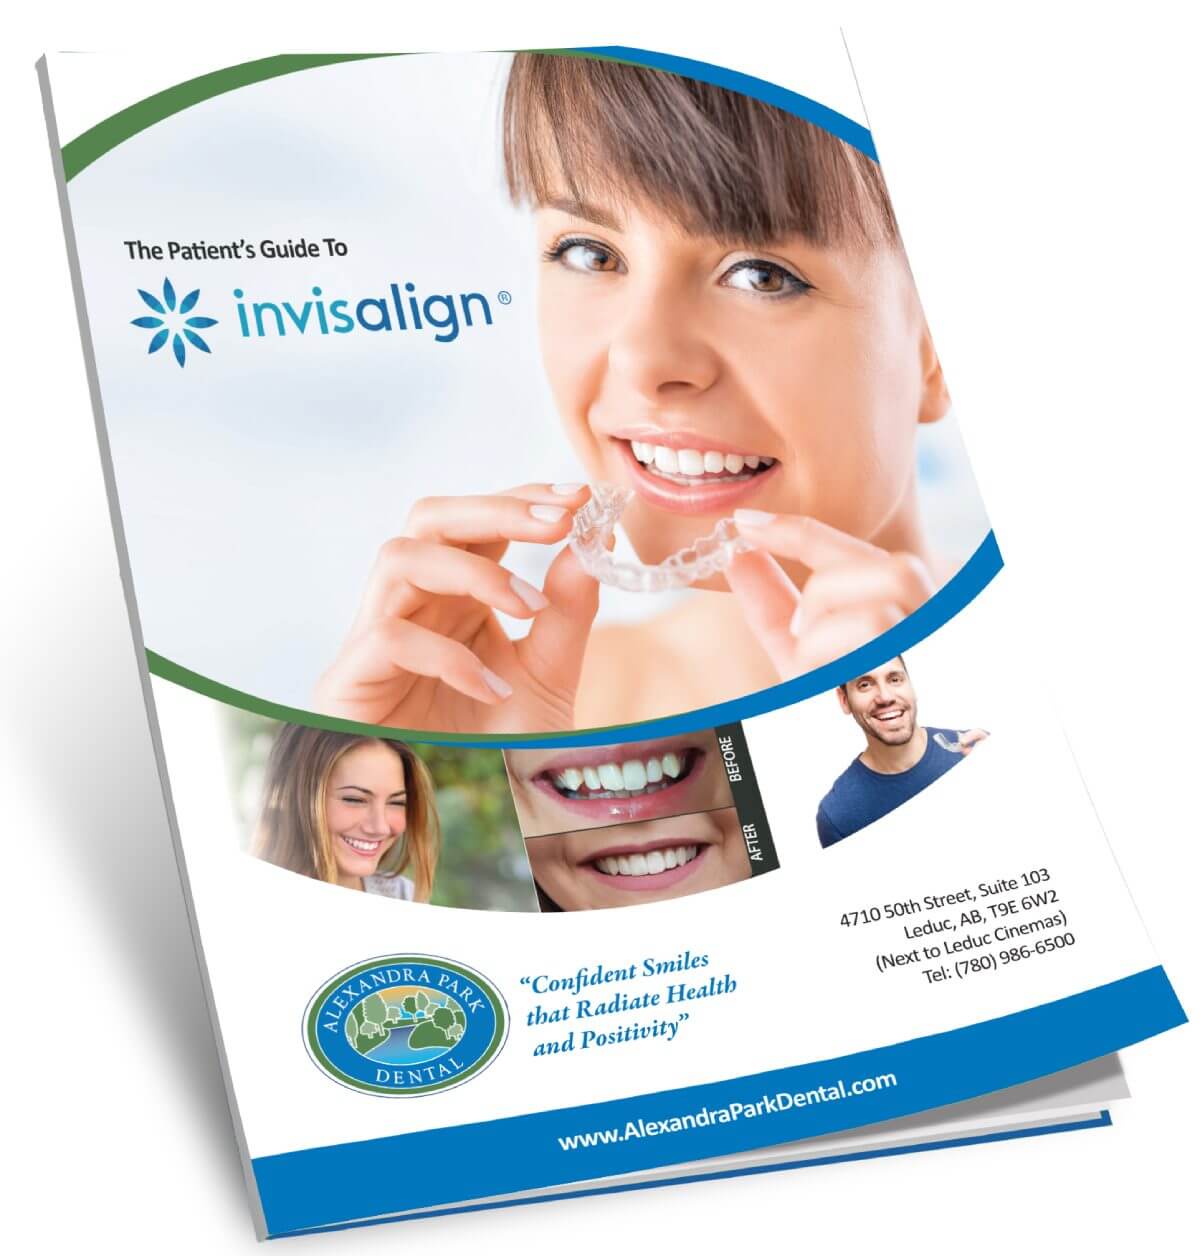 Booklet on guiding people through invisalign treatment